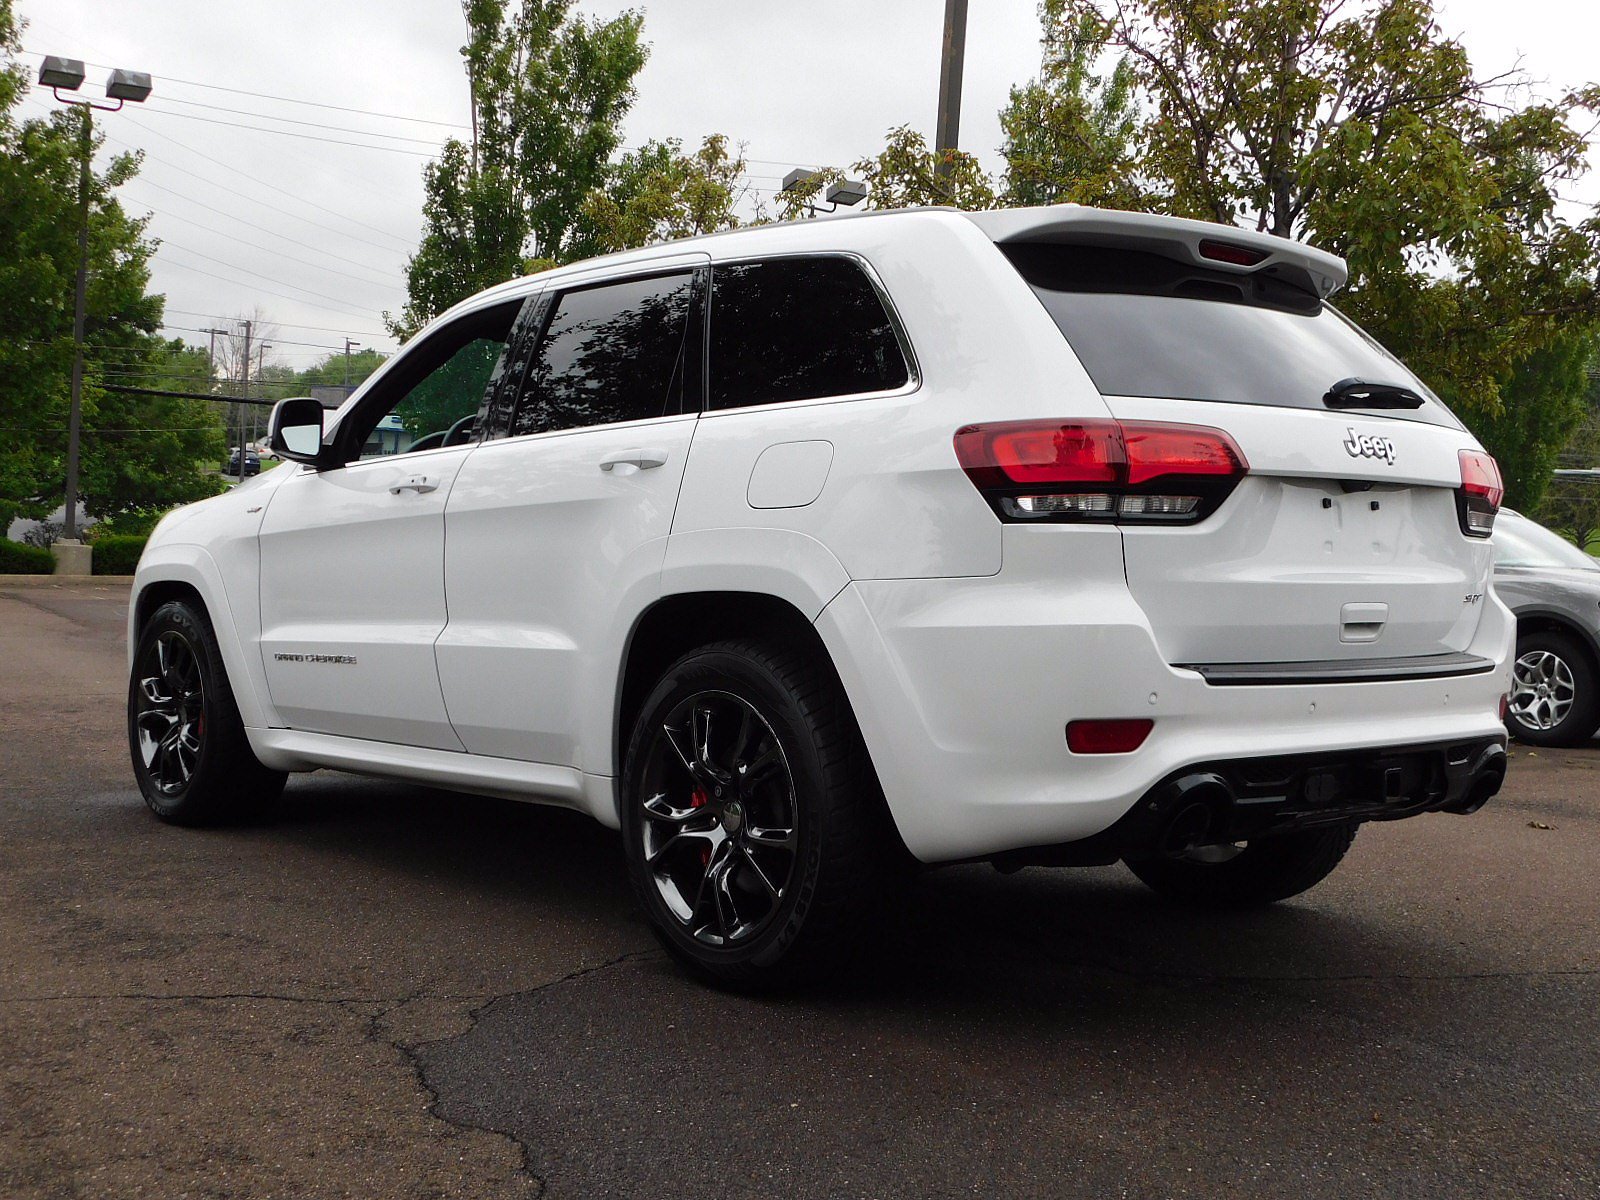 PreOwned 2015 Jeep Grand Cherokee SRT 4WD Sport Utility